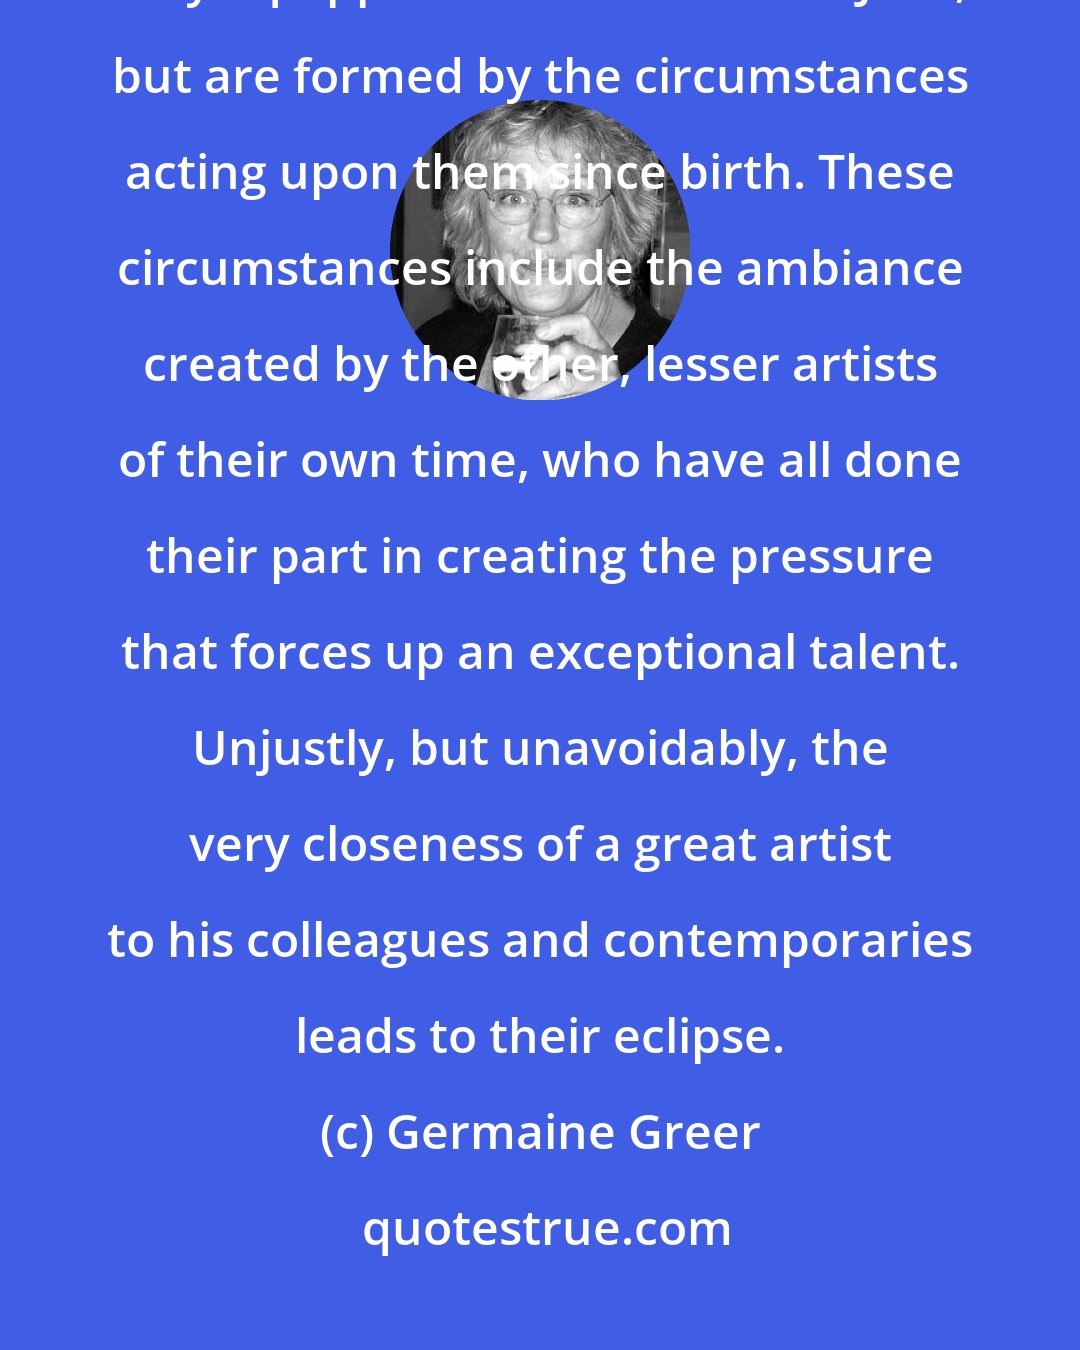 Germaine Greer: Great artists are products of their own time: they do not spring forth fully equipped from the head of Jove, but are formed by the circumstances acting upon them since birth. These circumstances include the ambiance created by the other, lesser artists of their own time, who have all done their part in creating the pressure that forces up an exceptional talent. Unjustly, but unavoidably, the very closeness of a great artist to his colleagues and contemporaries leads to their eclipse.